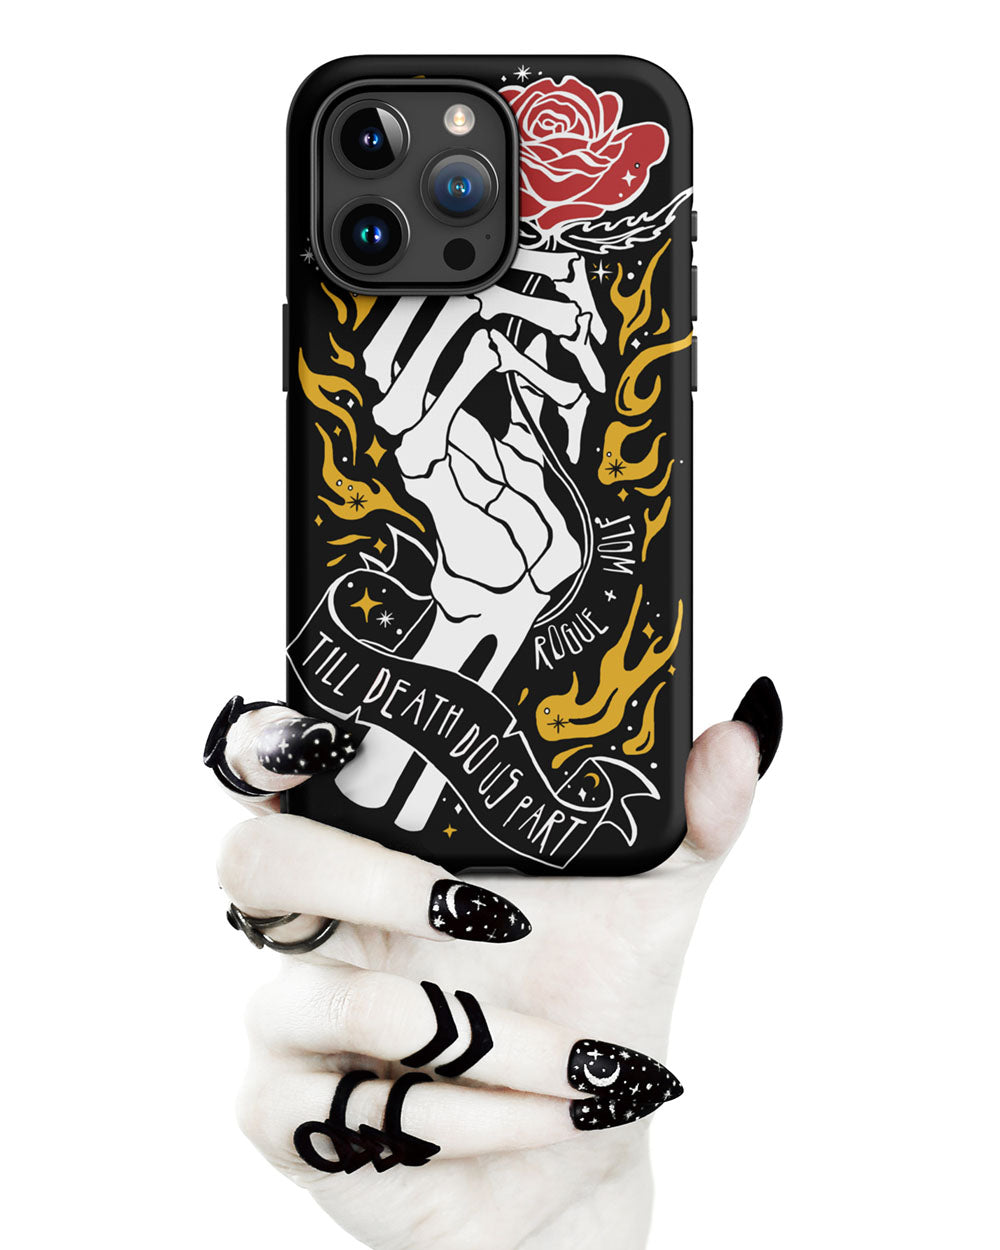 'Till Death Do Us Part’ Tough Phone Case for iPhone - Shockproof Witchy Goth Anti-scratch Cover